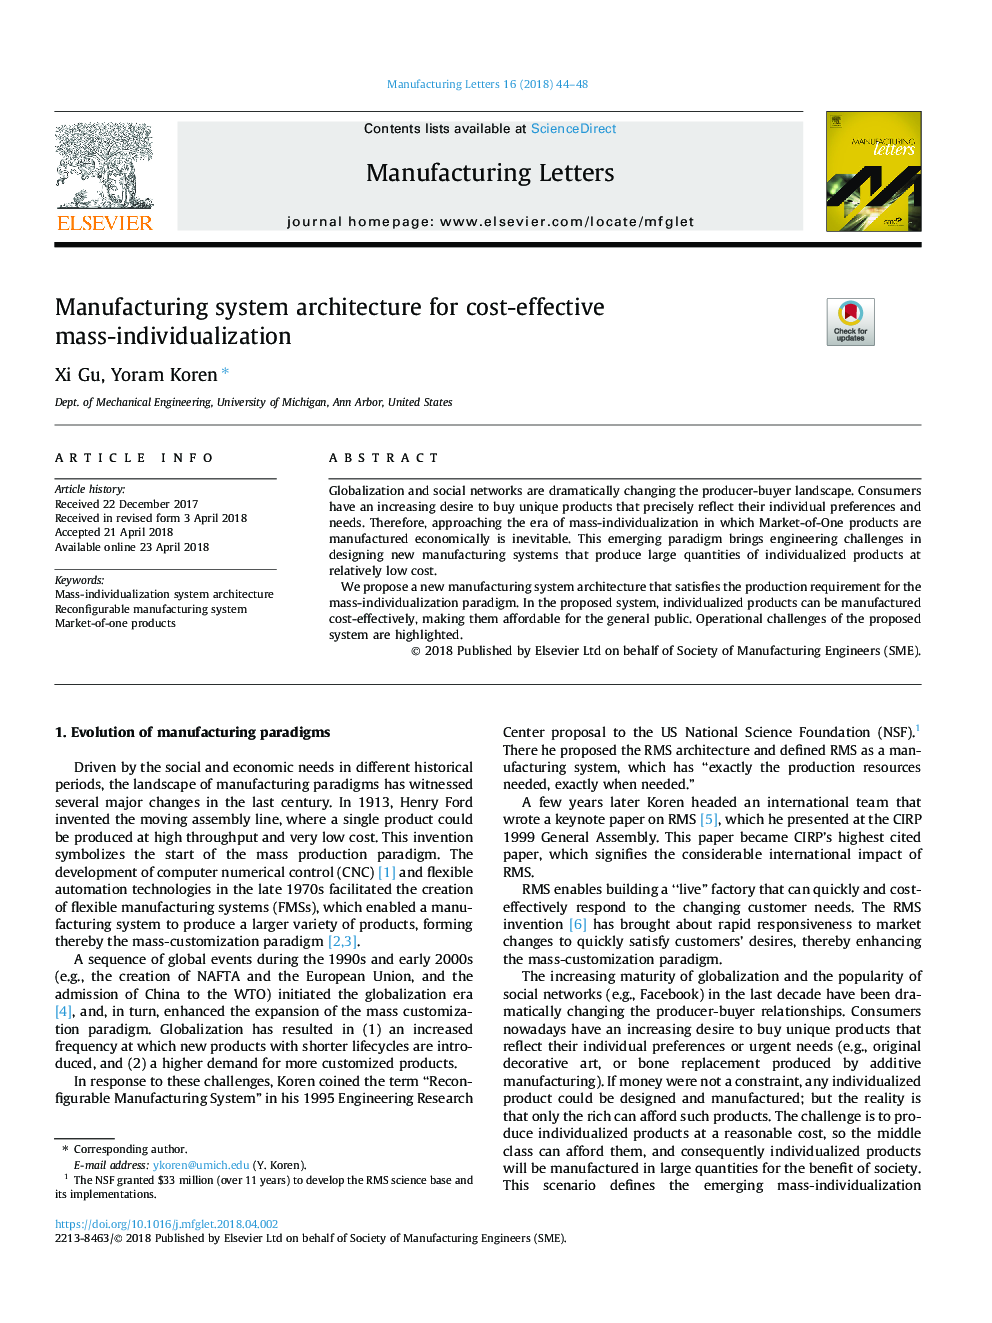 Manufacturing system architecture for cost-effective mass-individualization